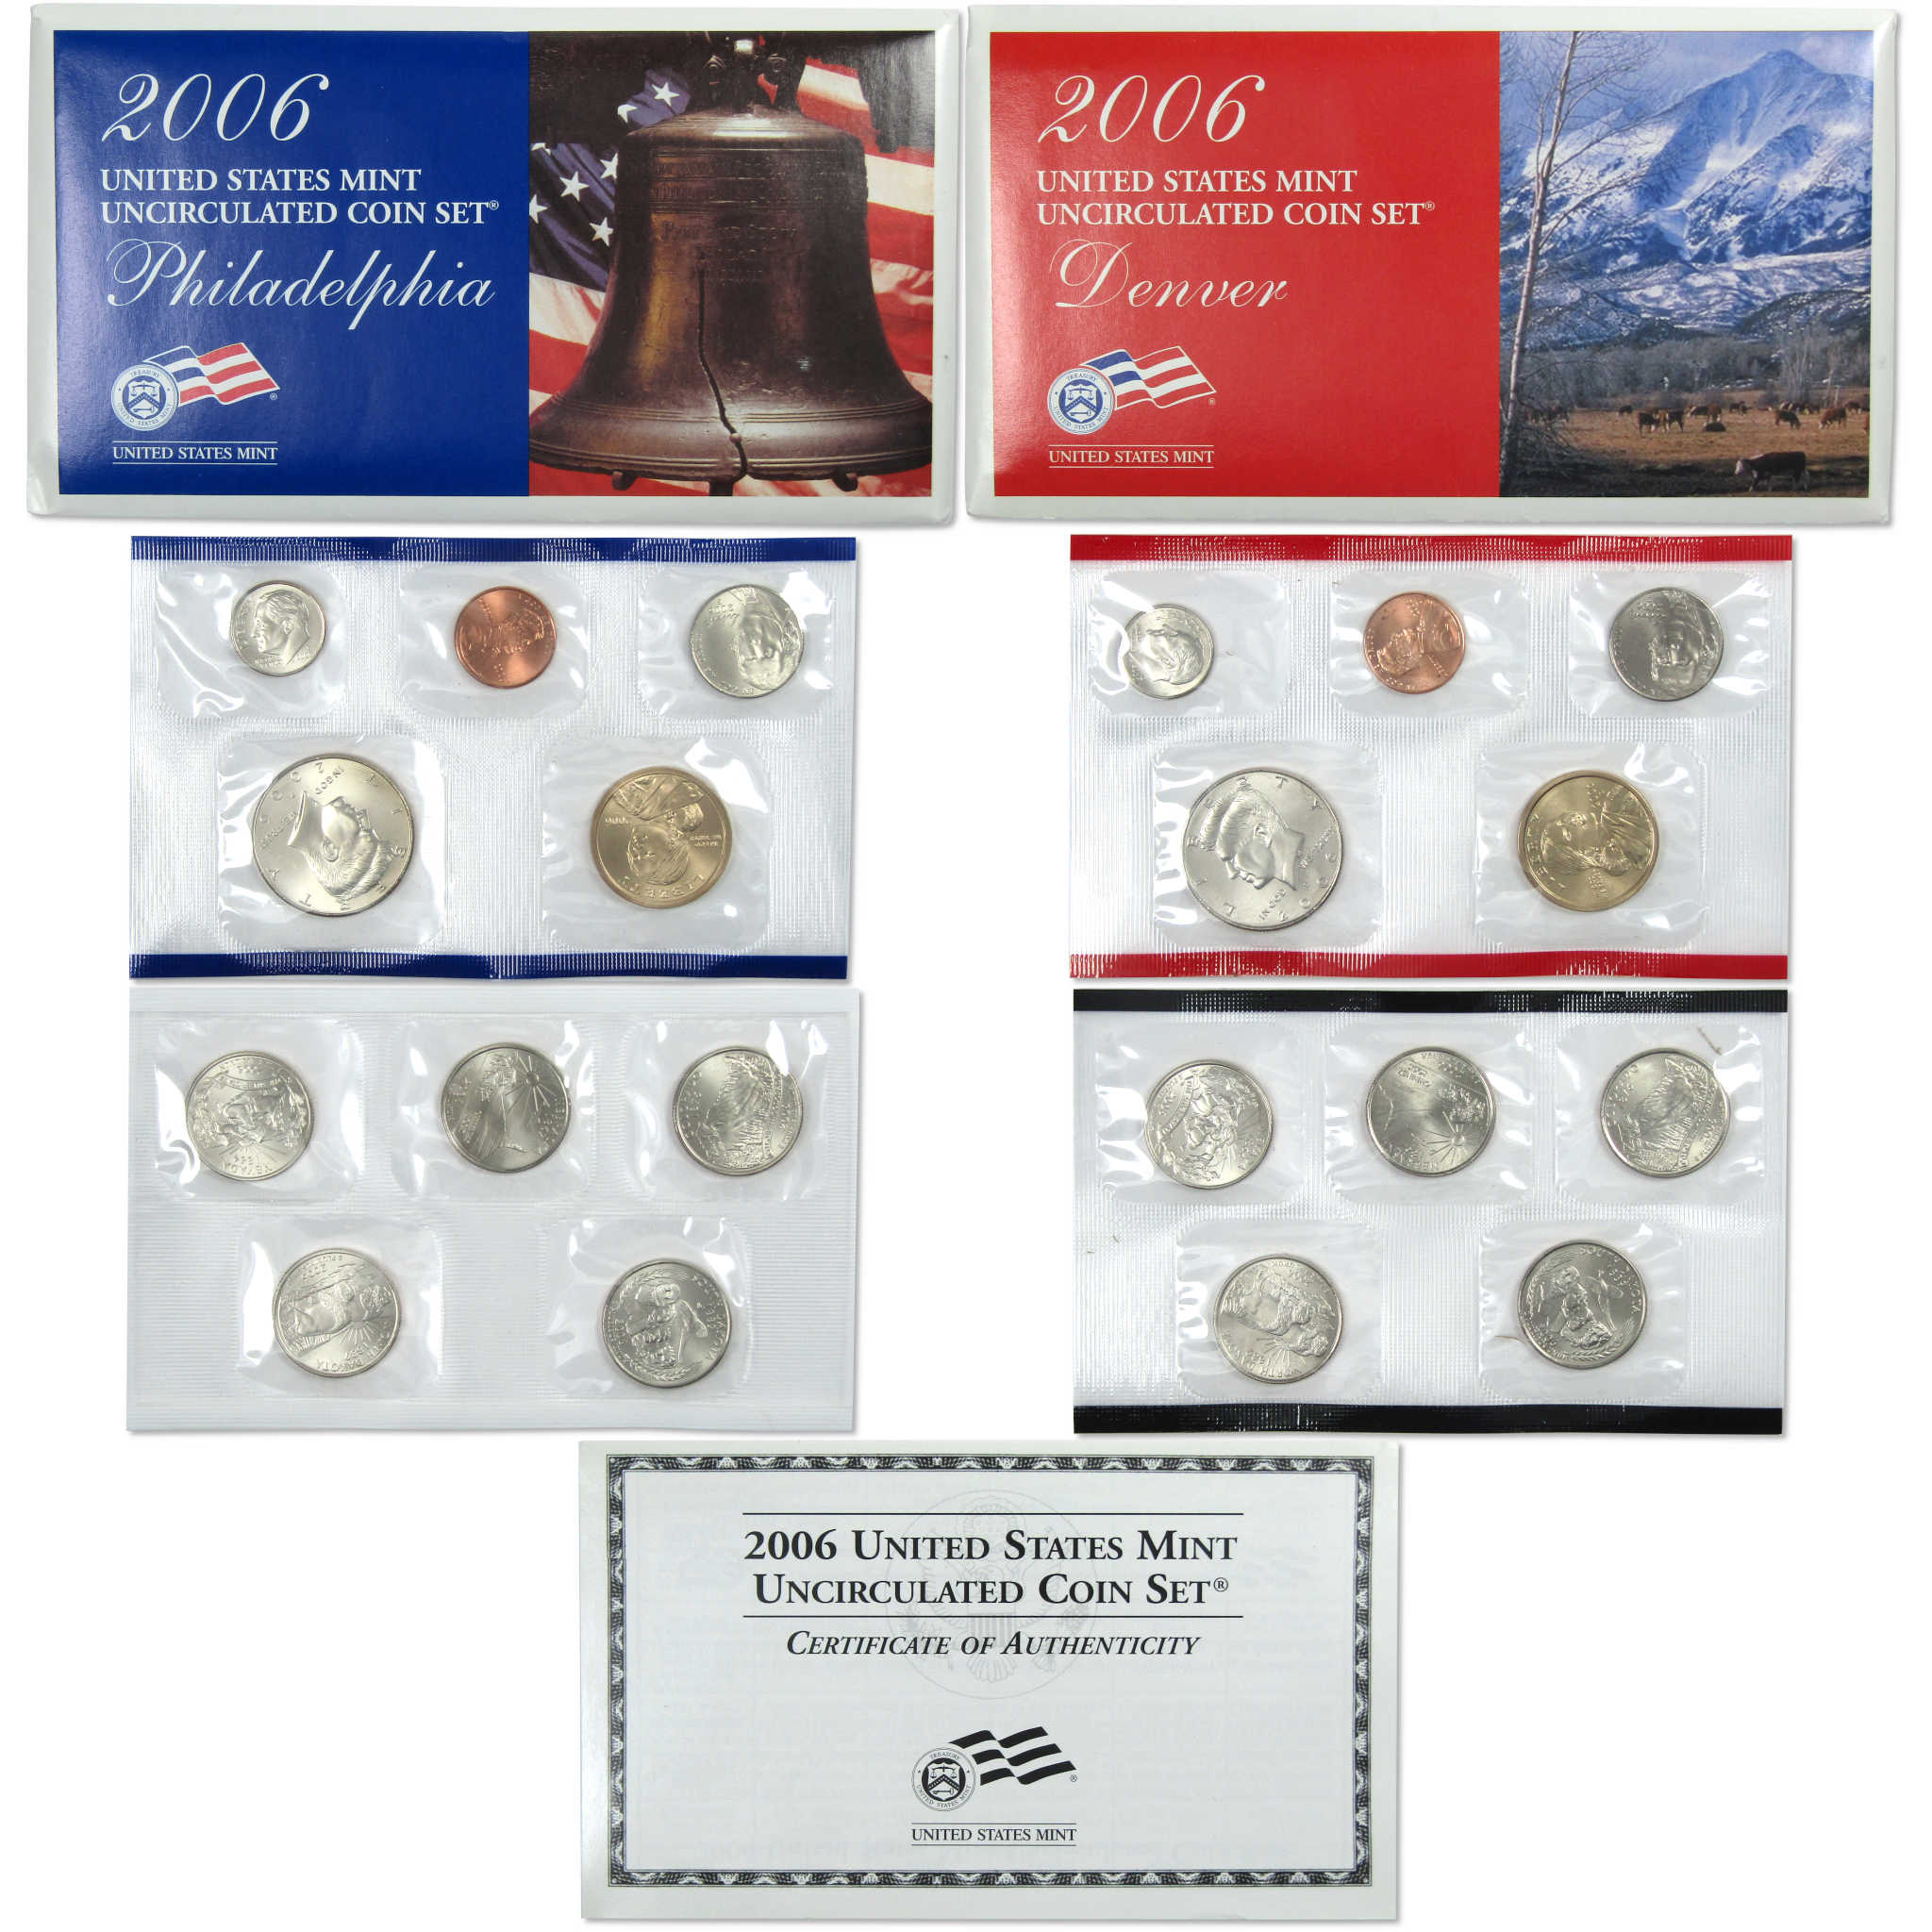 2006 Uncirculated Coin Set U.S Mint Government Packaging OGP COA